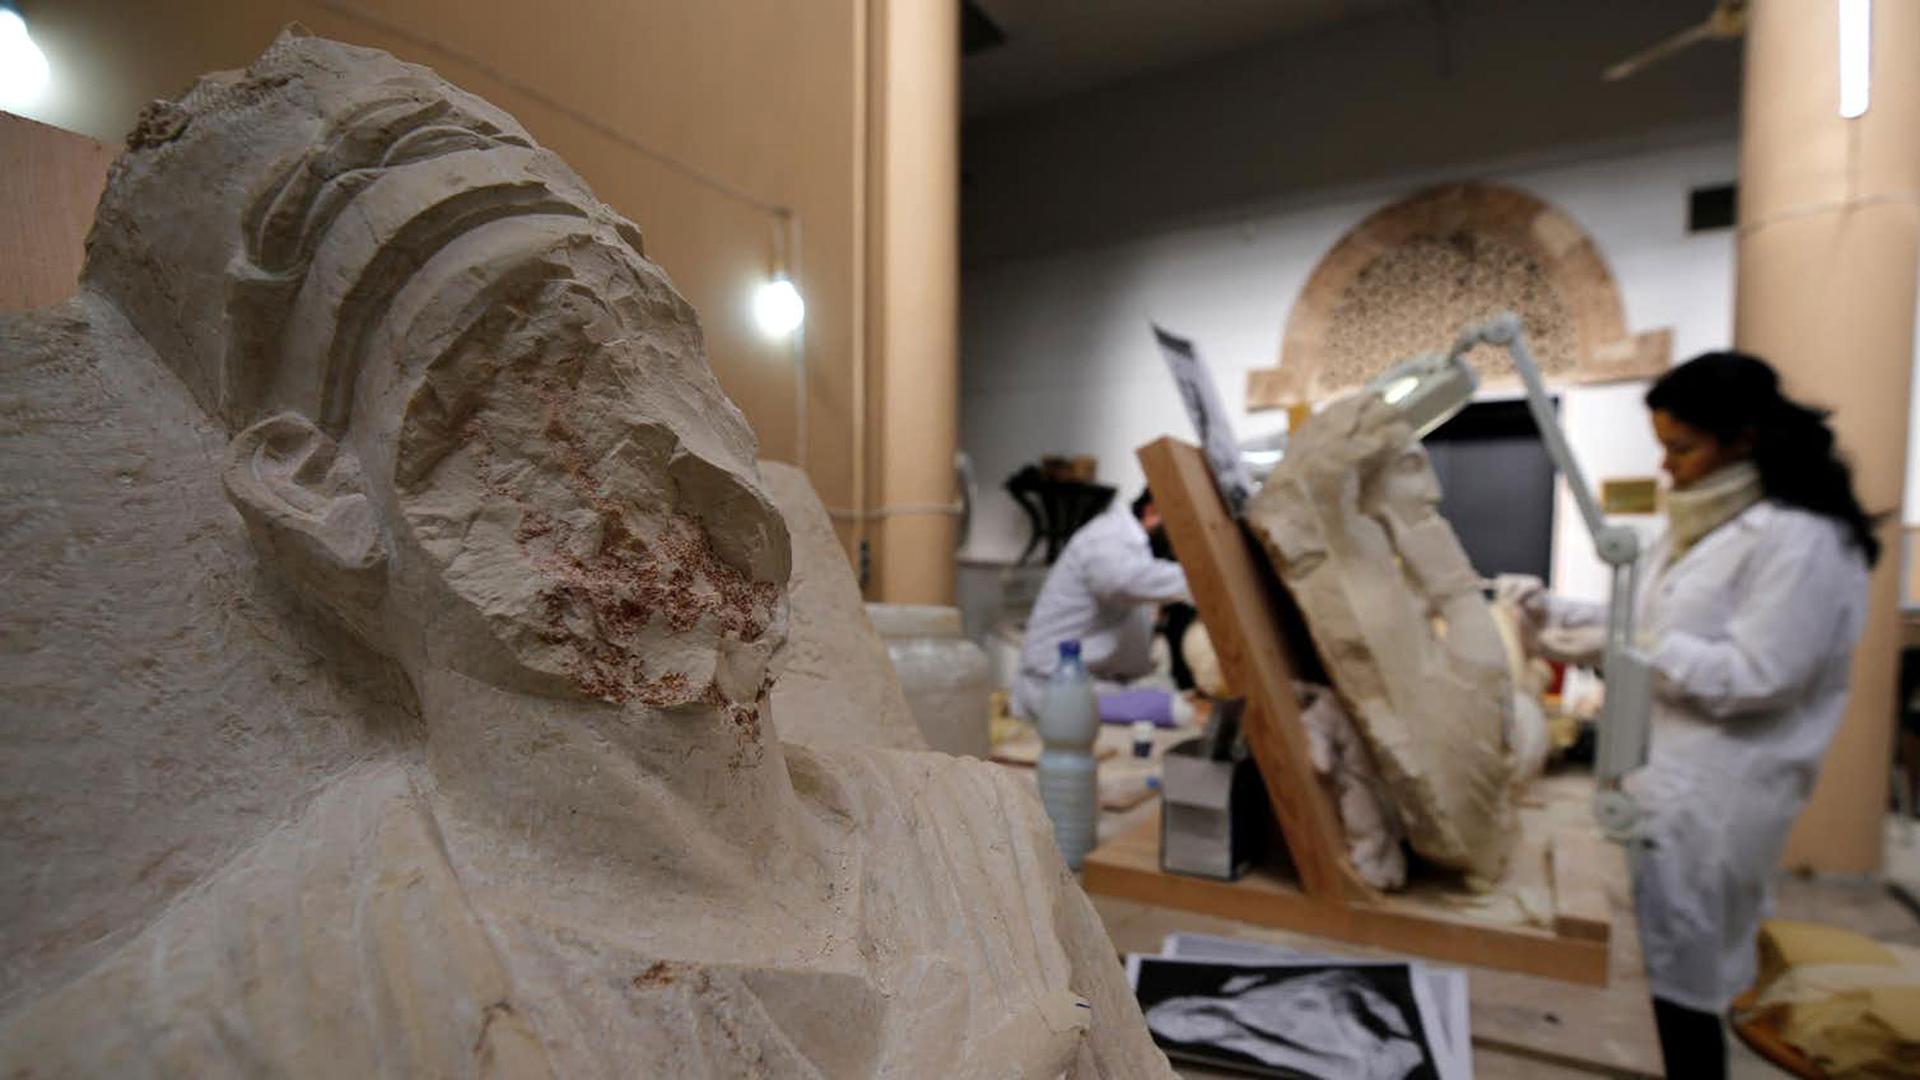 A woman works on damaged statues - one is missing part of its face - from Palmyra at Syria’s National Museum of Damascus